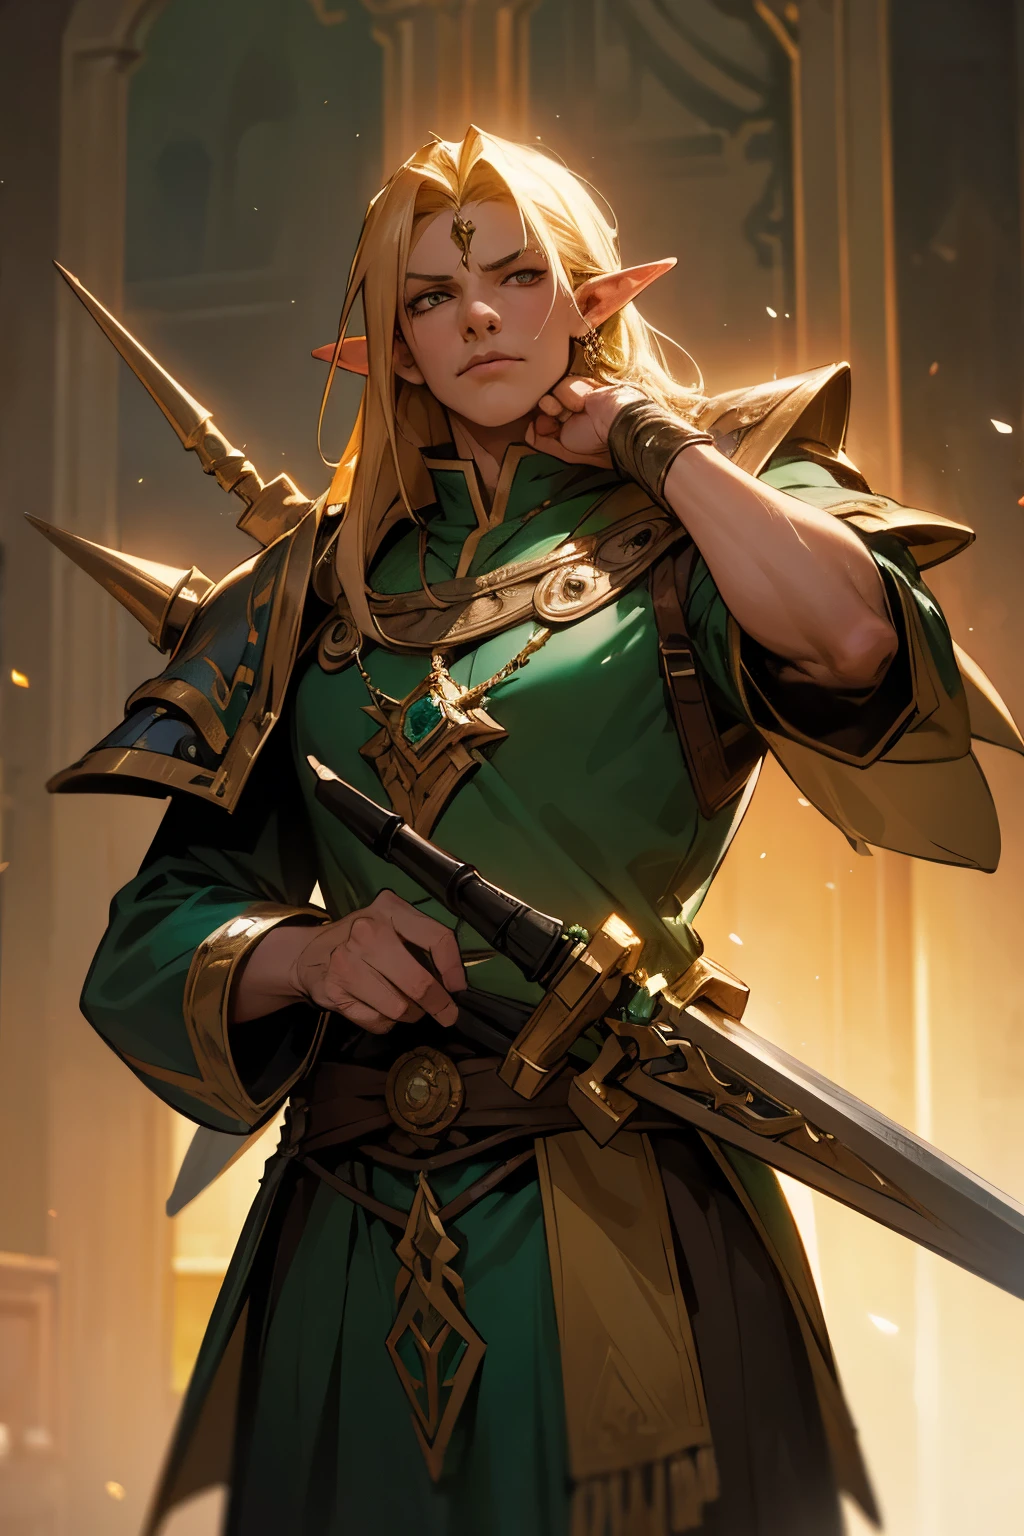 Generate an artwork inspired by the Warhammer Fantasy universe, depicting an elven character. The elf should be male, aged 96, standing at 174 cm, possessing emerald eyes, and adorned with golden blond hair. Equip the character with a sword in one hand and a hand-held dwarf pistol in the other. Immerse the scene in the distinct stylistic elements of the Warhammer Fantasy universe, capturing the dark and gritty ambiance characteristic of this fantasy realm